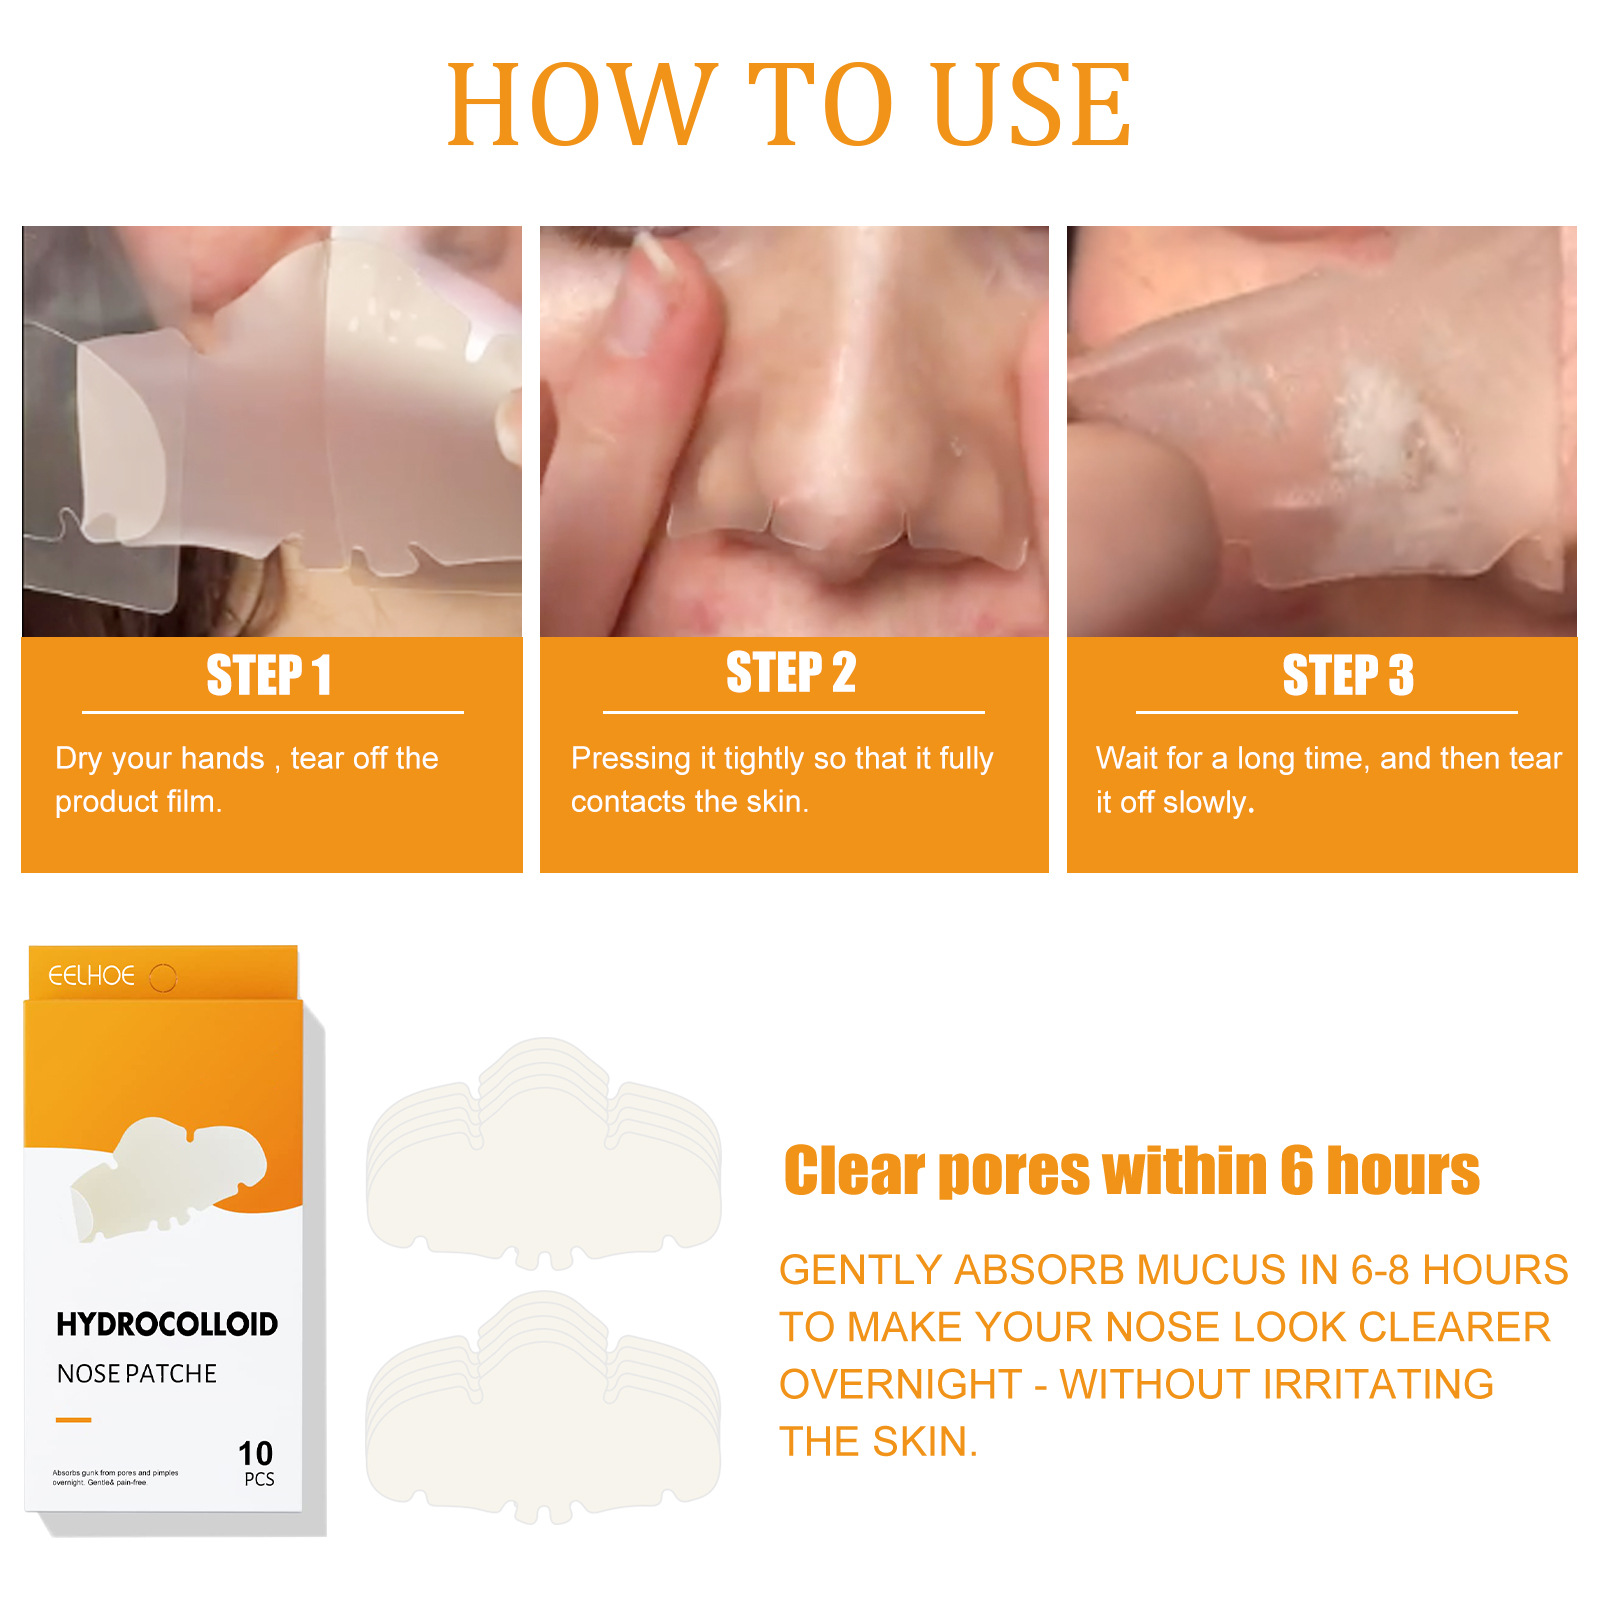 Hydrocolloid Nose Patch- Beauty And Sales